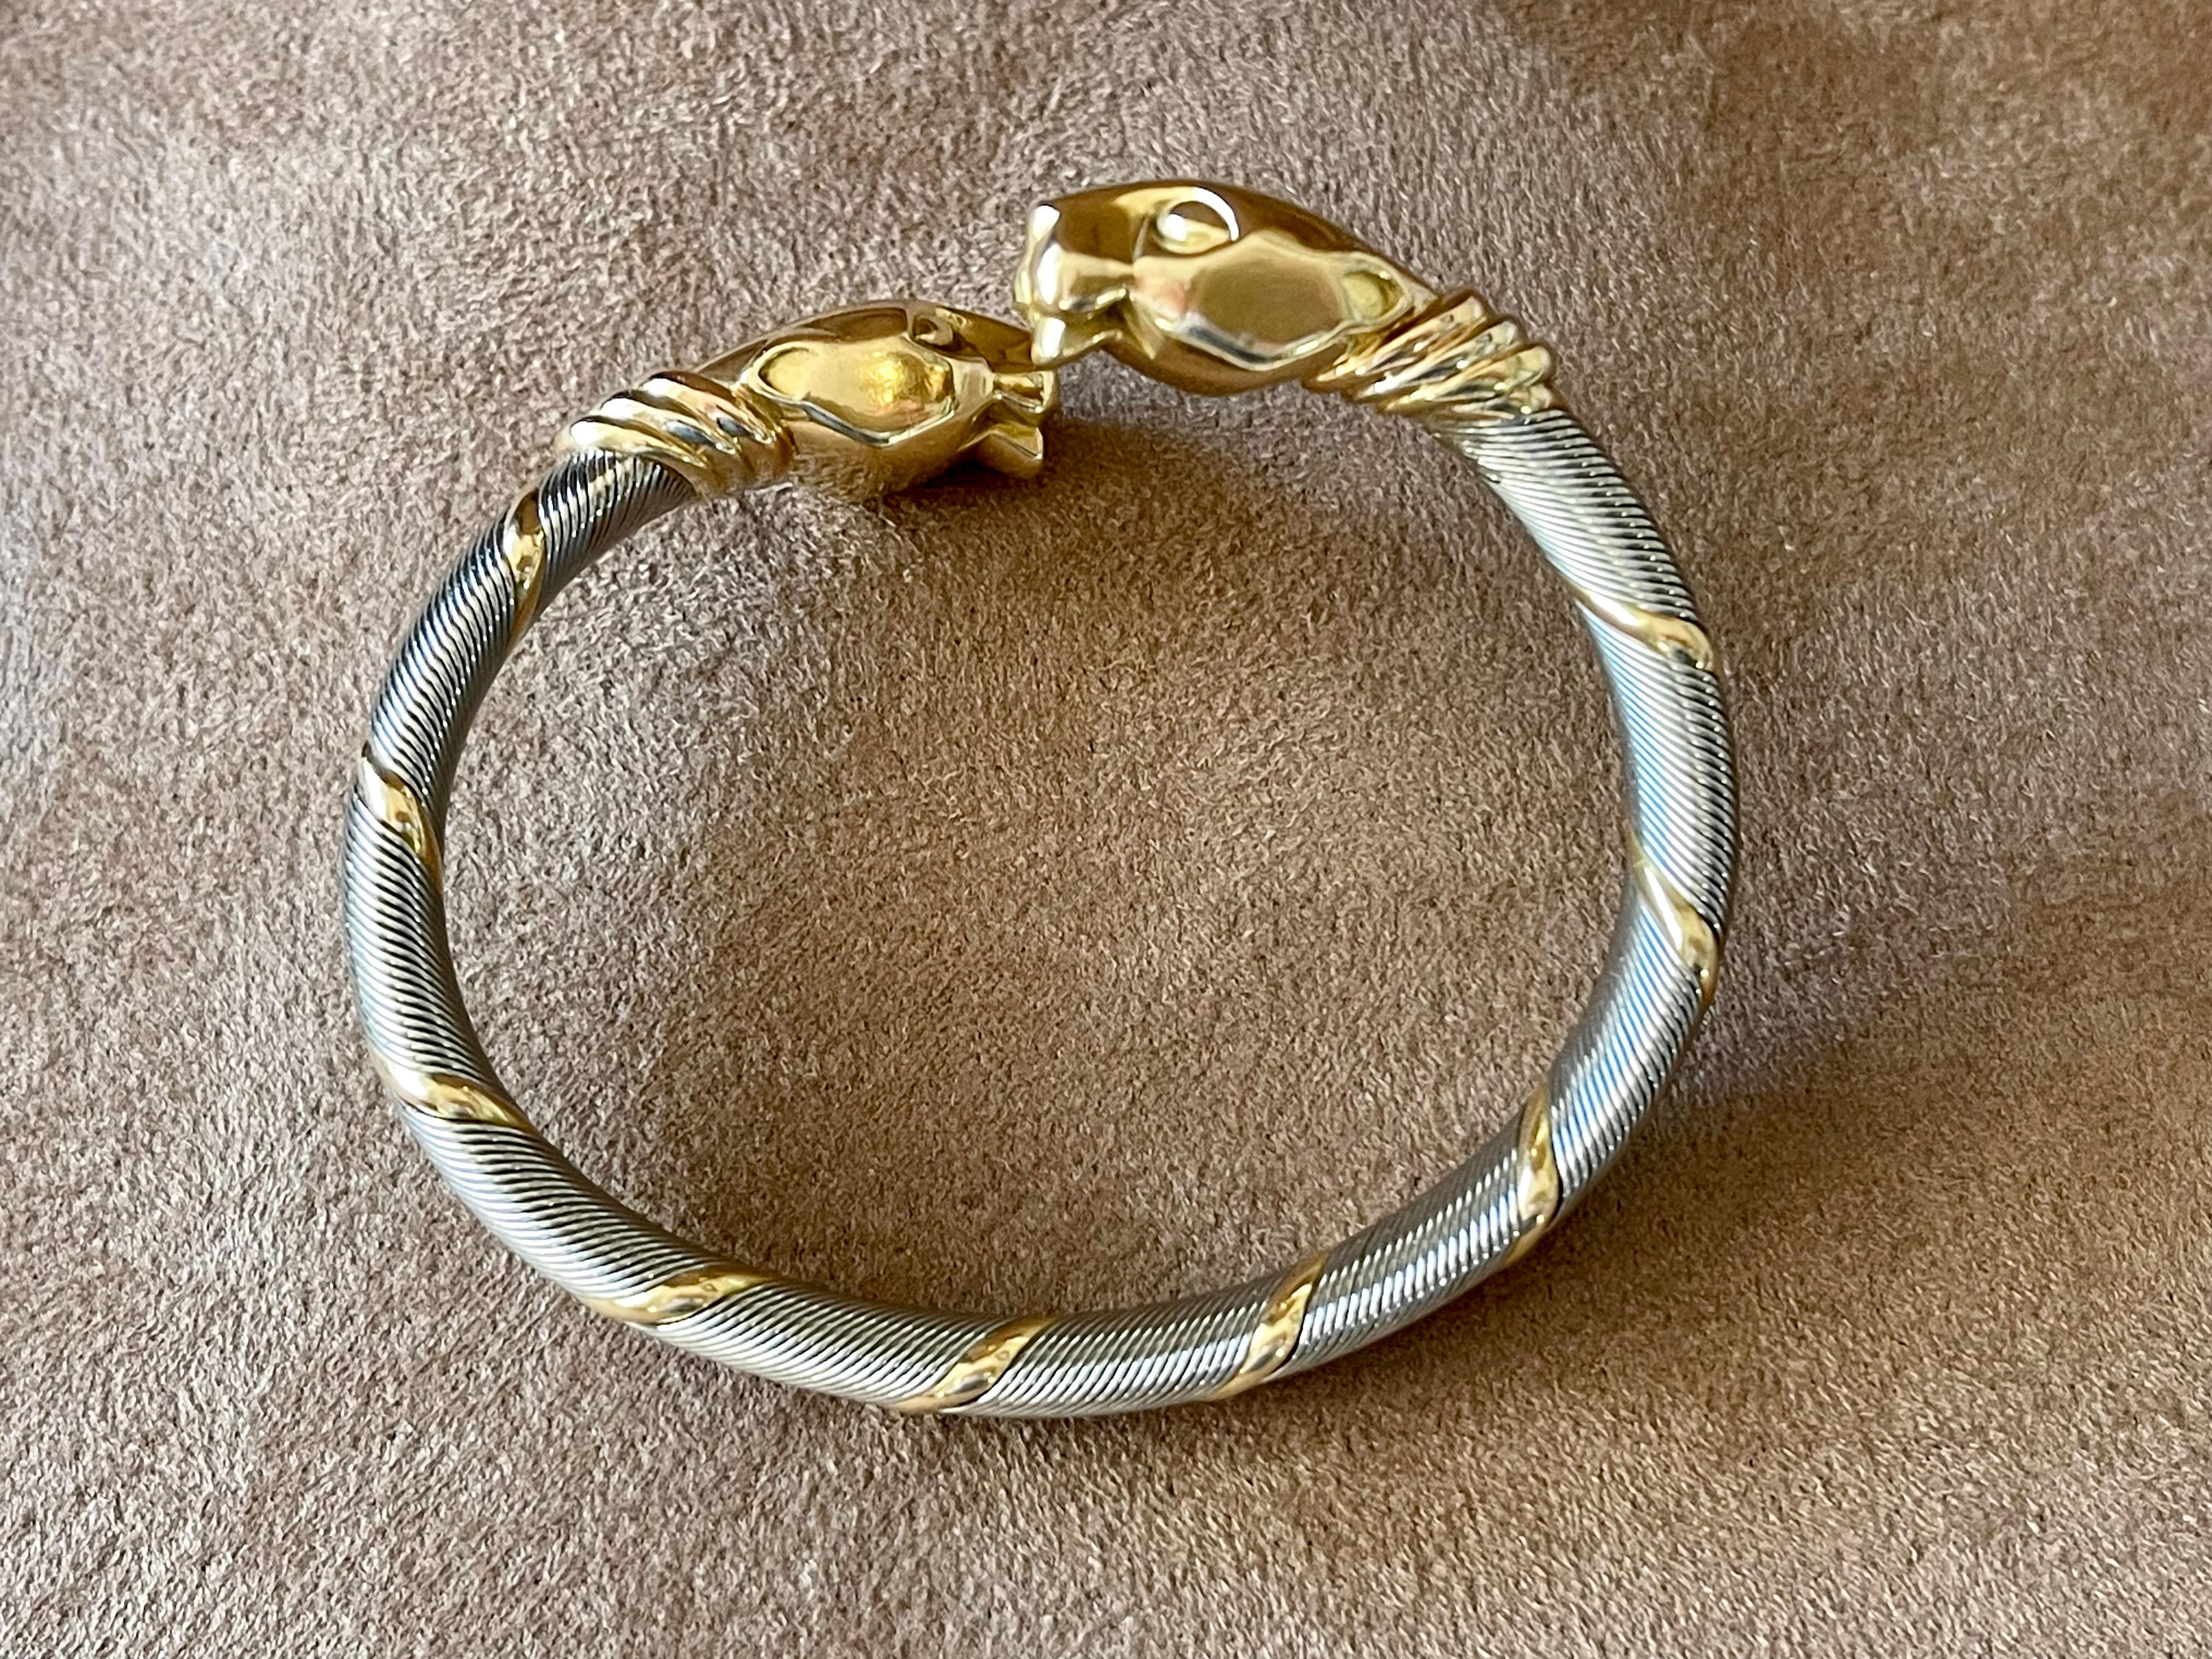 Cougar Cartier Bangle Bracelet Panther stainless steel yellow white rose Gold In Good Condition For Sale In Zurich, Zollstrasse